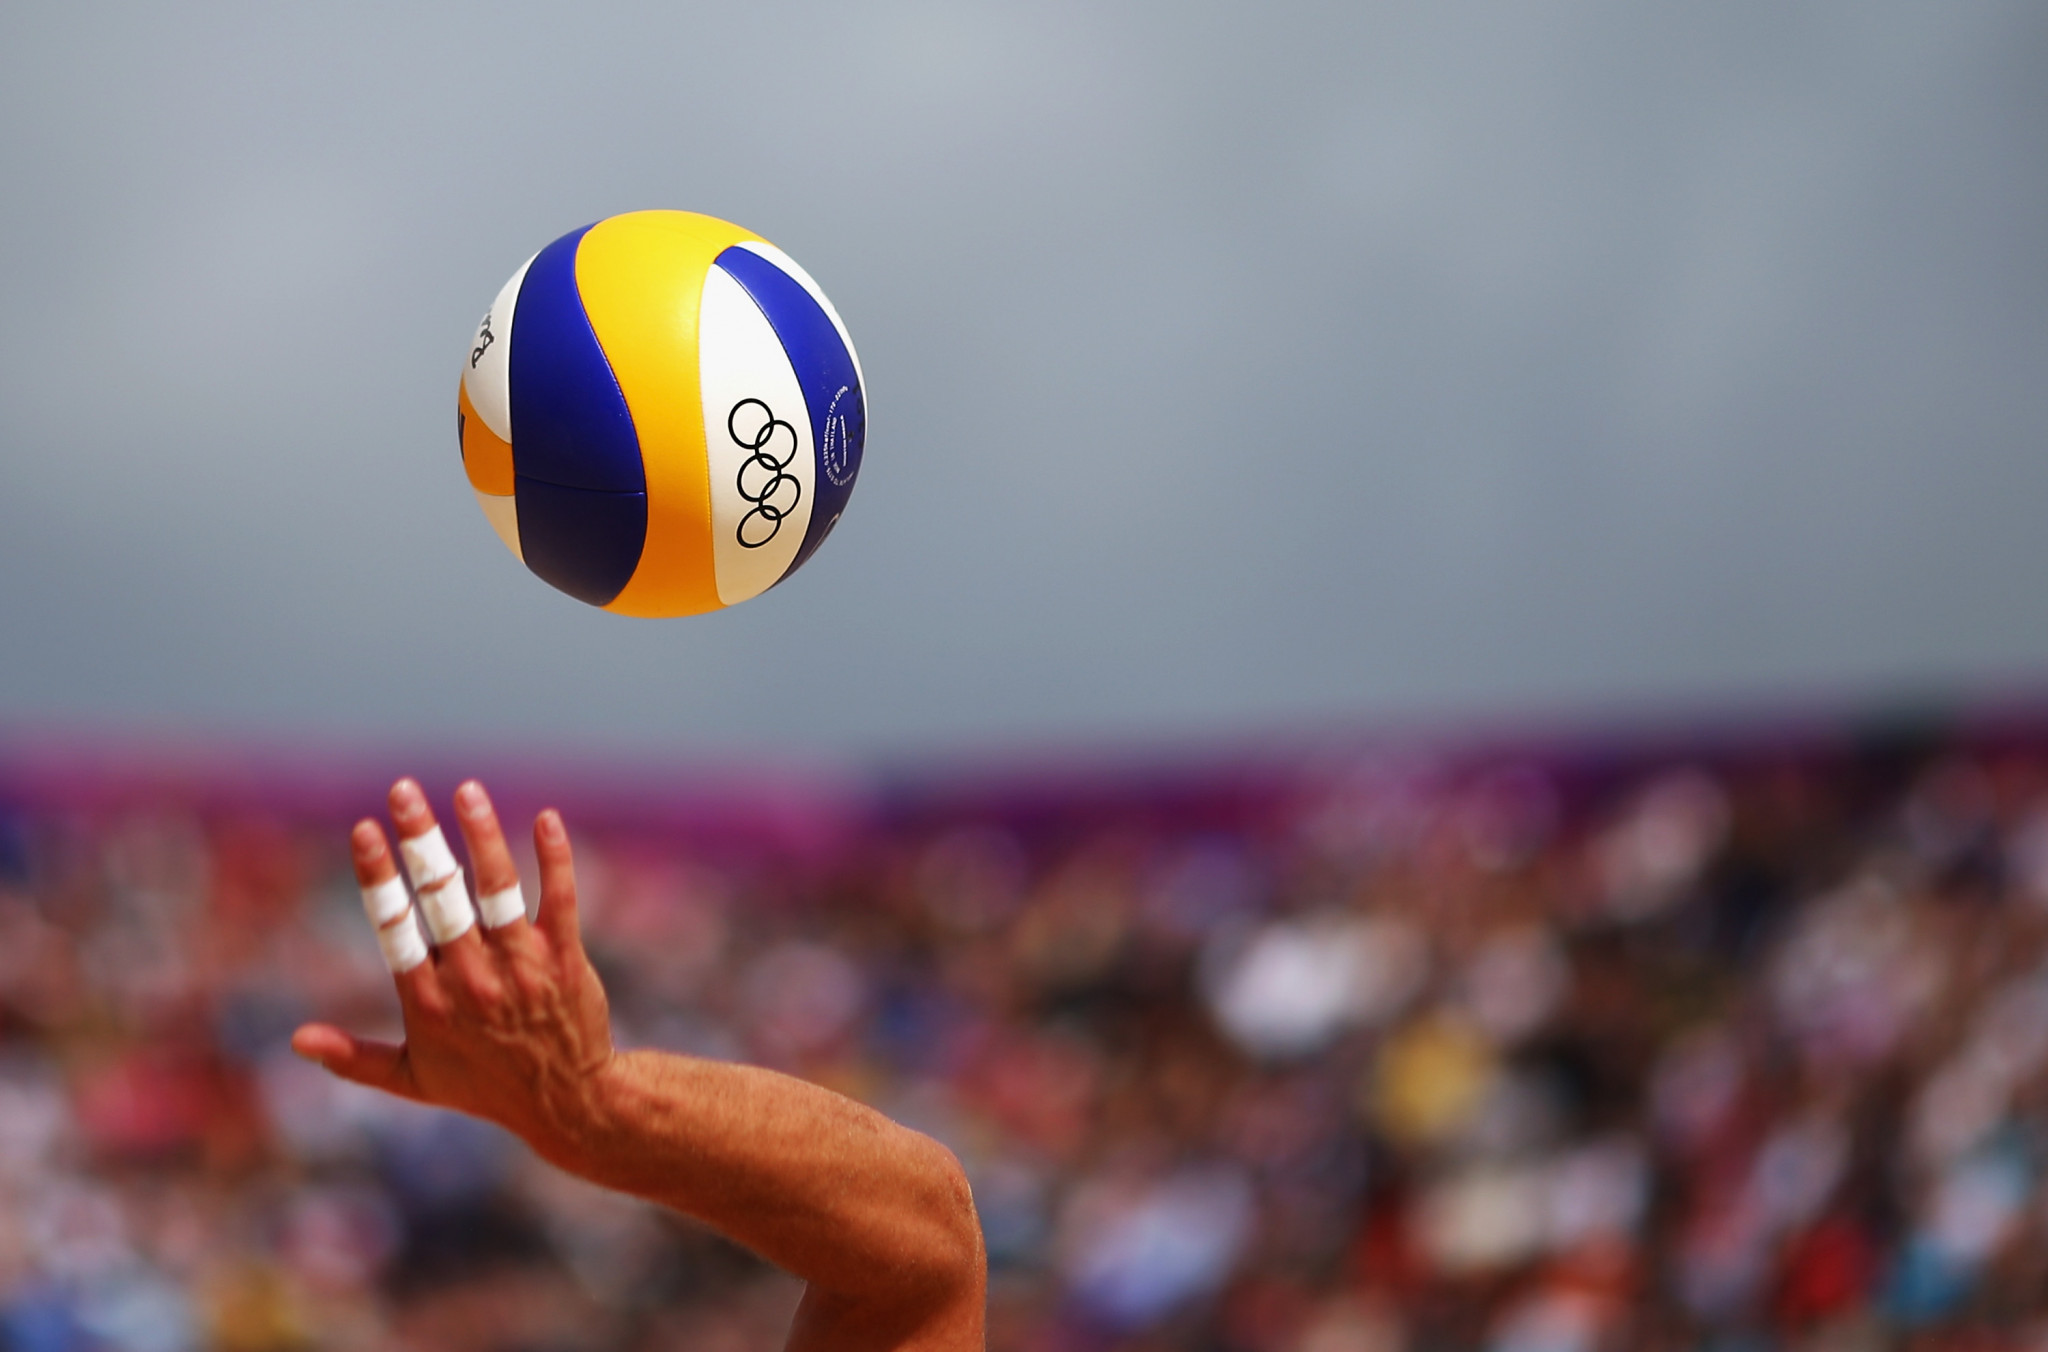 FIVB offers short-term financial assistance through Athletes’ Relief Support Fund